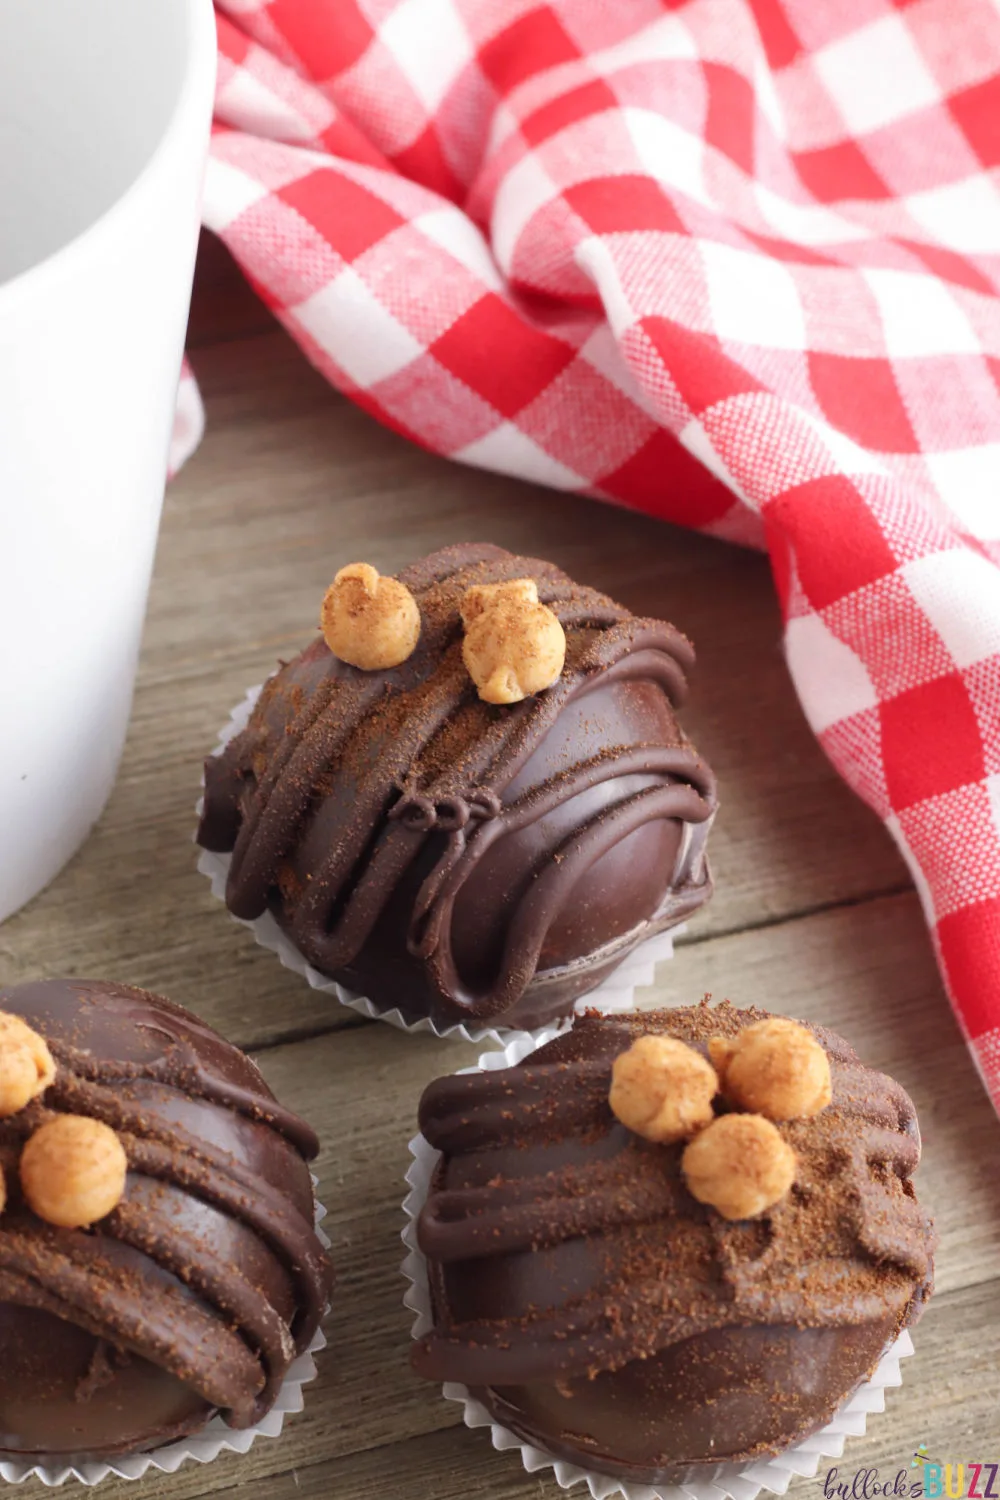 These Caramel Mocha Coffee Bombs are extra special because not only do are they rich and delicious tasting, they look amazing too! #coffeebomb #espressobomb #recipes #caramelmocha #coffee